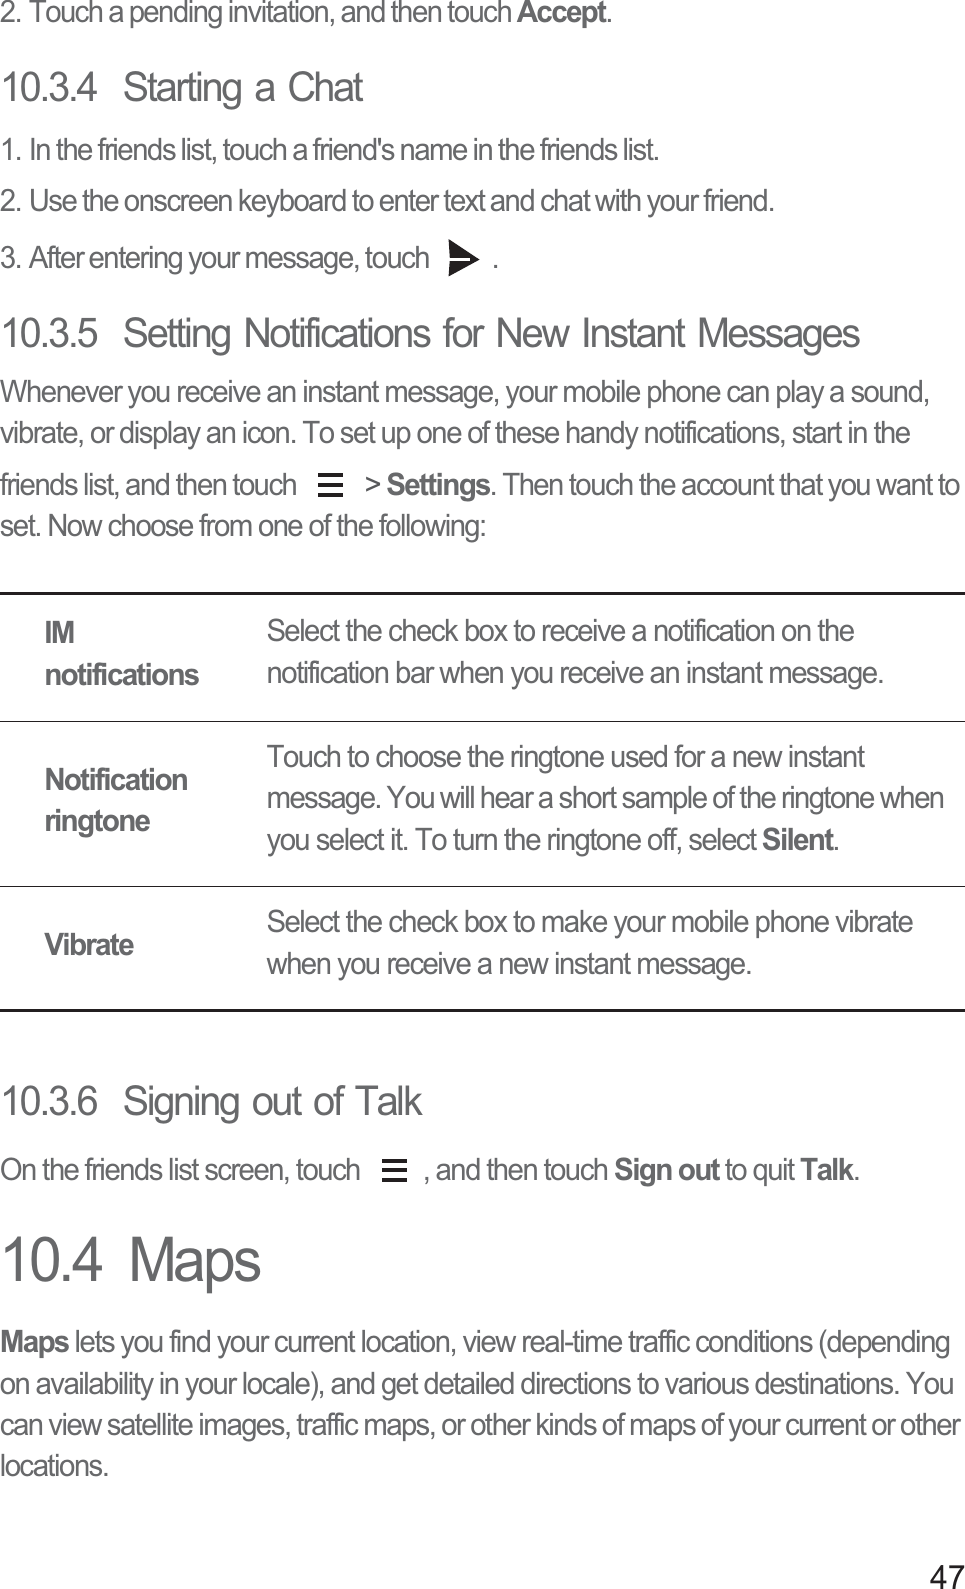 472. Touch a pending invitation, and then touch Accept.10.3.4  Starting a Chat1. In the friends list, touch a friend&apos;s name in the friends list.2. Use the onscreen keyboard to enter text and chat with your friend.3. After entering your message, touch  .10.3.5  Setting Notifications for New Instant MessagesWhenever you receive an instant message, your mobile phone can play a sound, vibrate, or display an icon. To set up one of these handy notifications, start in the friends list, and then touch   &gt; Settings. Then touch the account that you want to set. Now choose from one of the following:10.3.6  Signing out of TalkOn the friends list screen, touch  , and then touch Sign out to quit Talk.10.4  MapsMaps lets you find your current location, view real-time traffic conditions (depending on availability in your locale), and get detailed directions to various destinations. You can view satellite images, traffic maps, or other kinds of maps of your current or other locations.IM notificationsSelect the check box to receive a notification on the notification bar when you receive an instant message.Notification ringtoneTouch to choose the ringtone used for a new instant message. You will hear a short sample of the ringtone when you select it. To turn the ringtone off, select Silent.VibrateSelect the check box to make your mobile phone vibrate when you receive a new instant message.